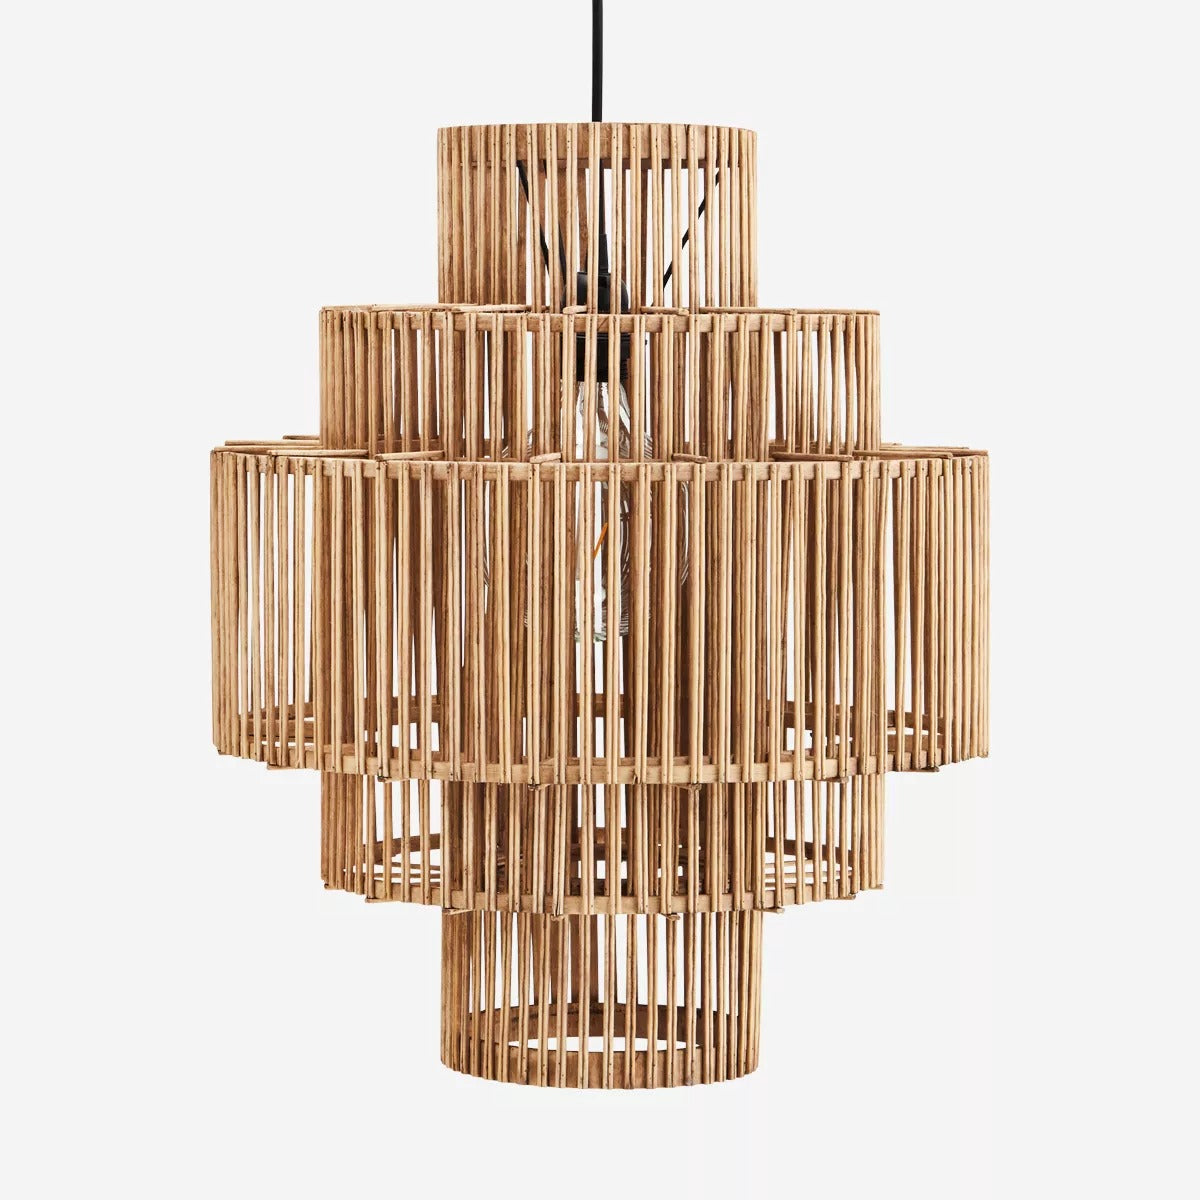 Madam Stoltz Light - Ceiling Cage Lamp in Bamboo